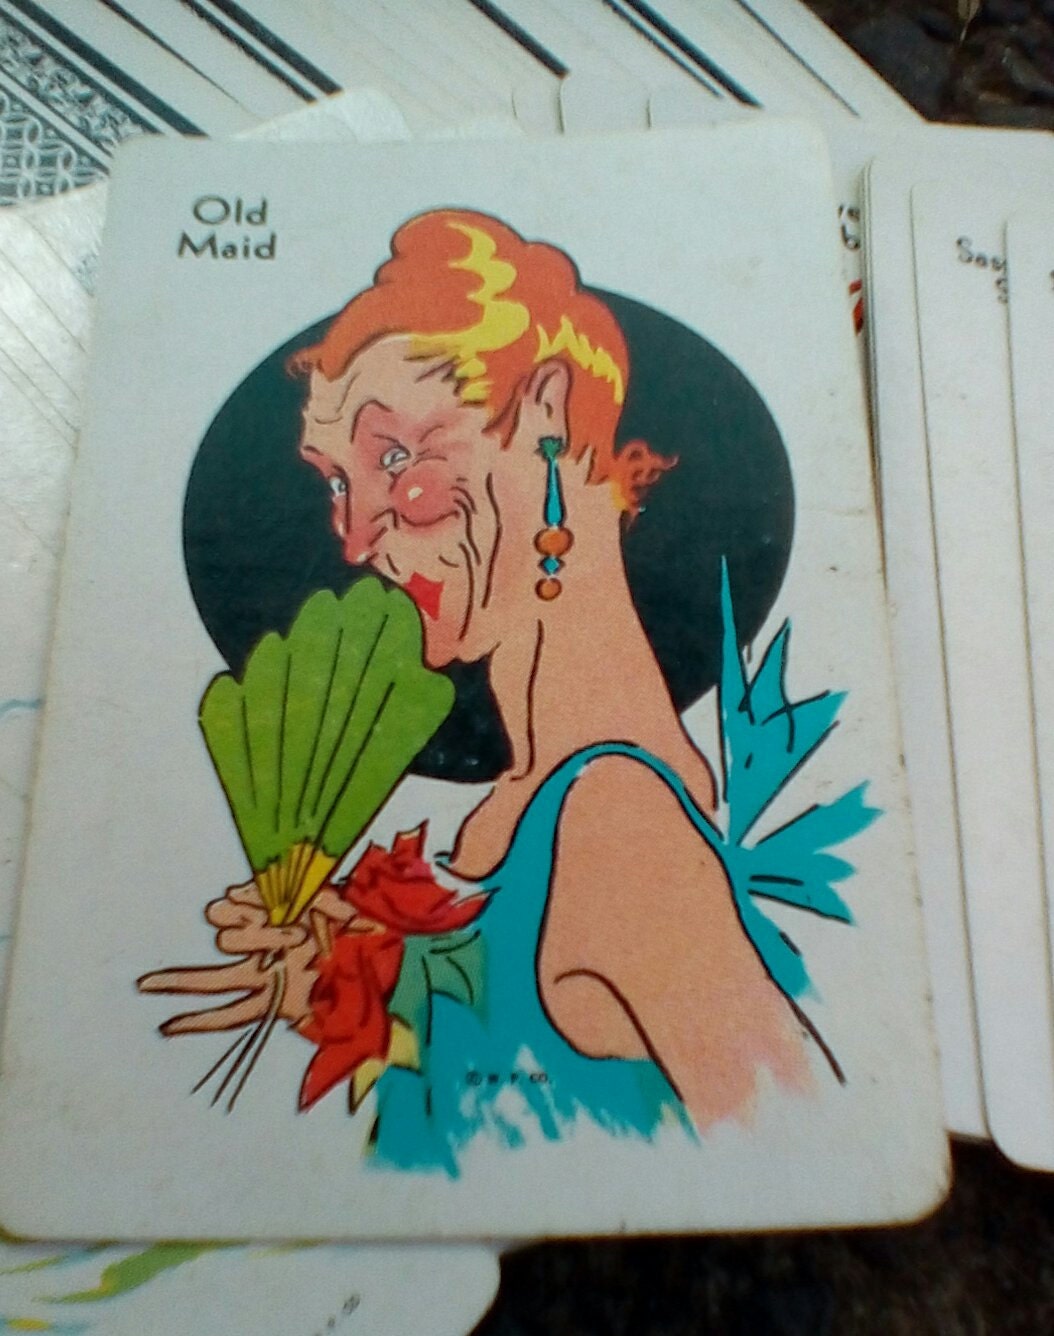 old maid card game instructions